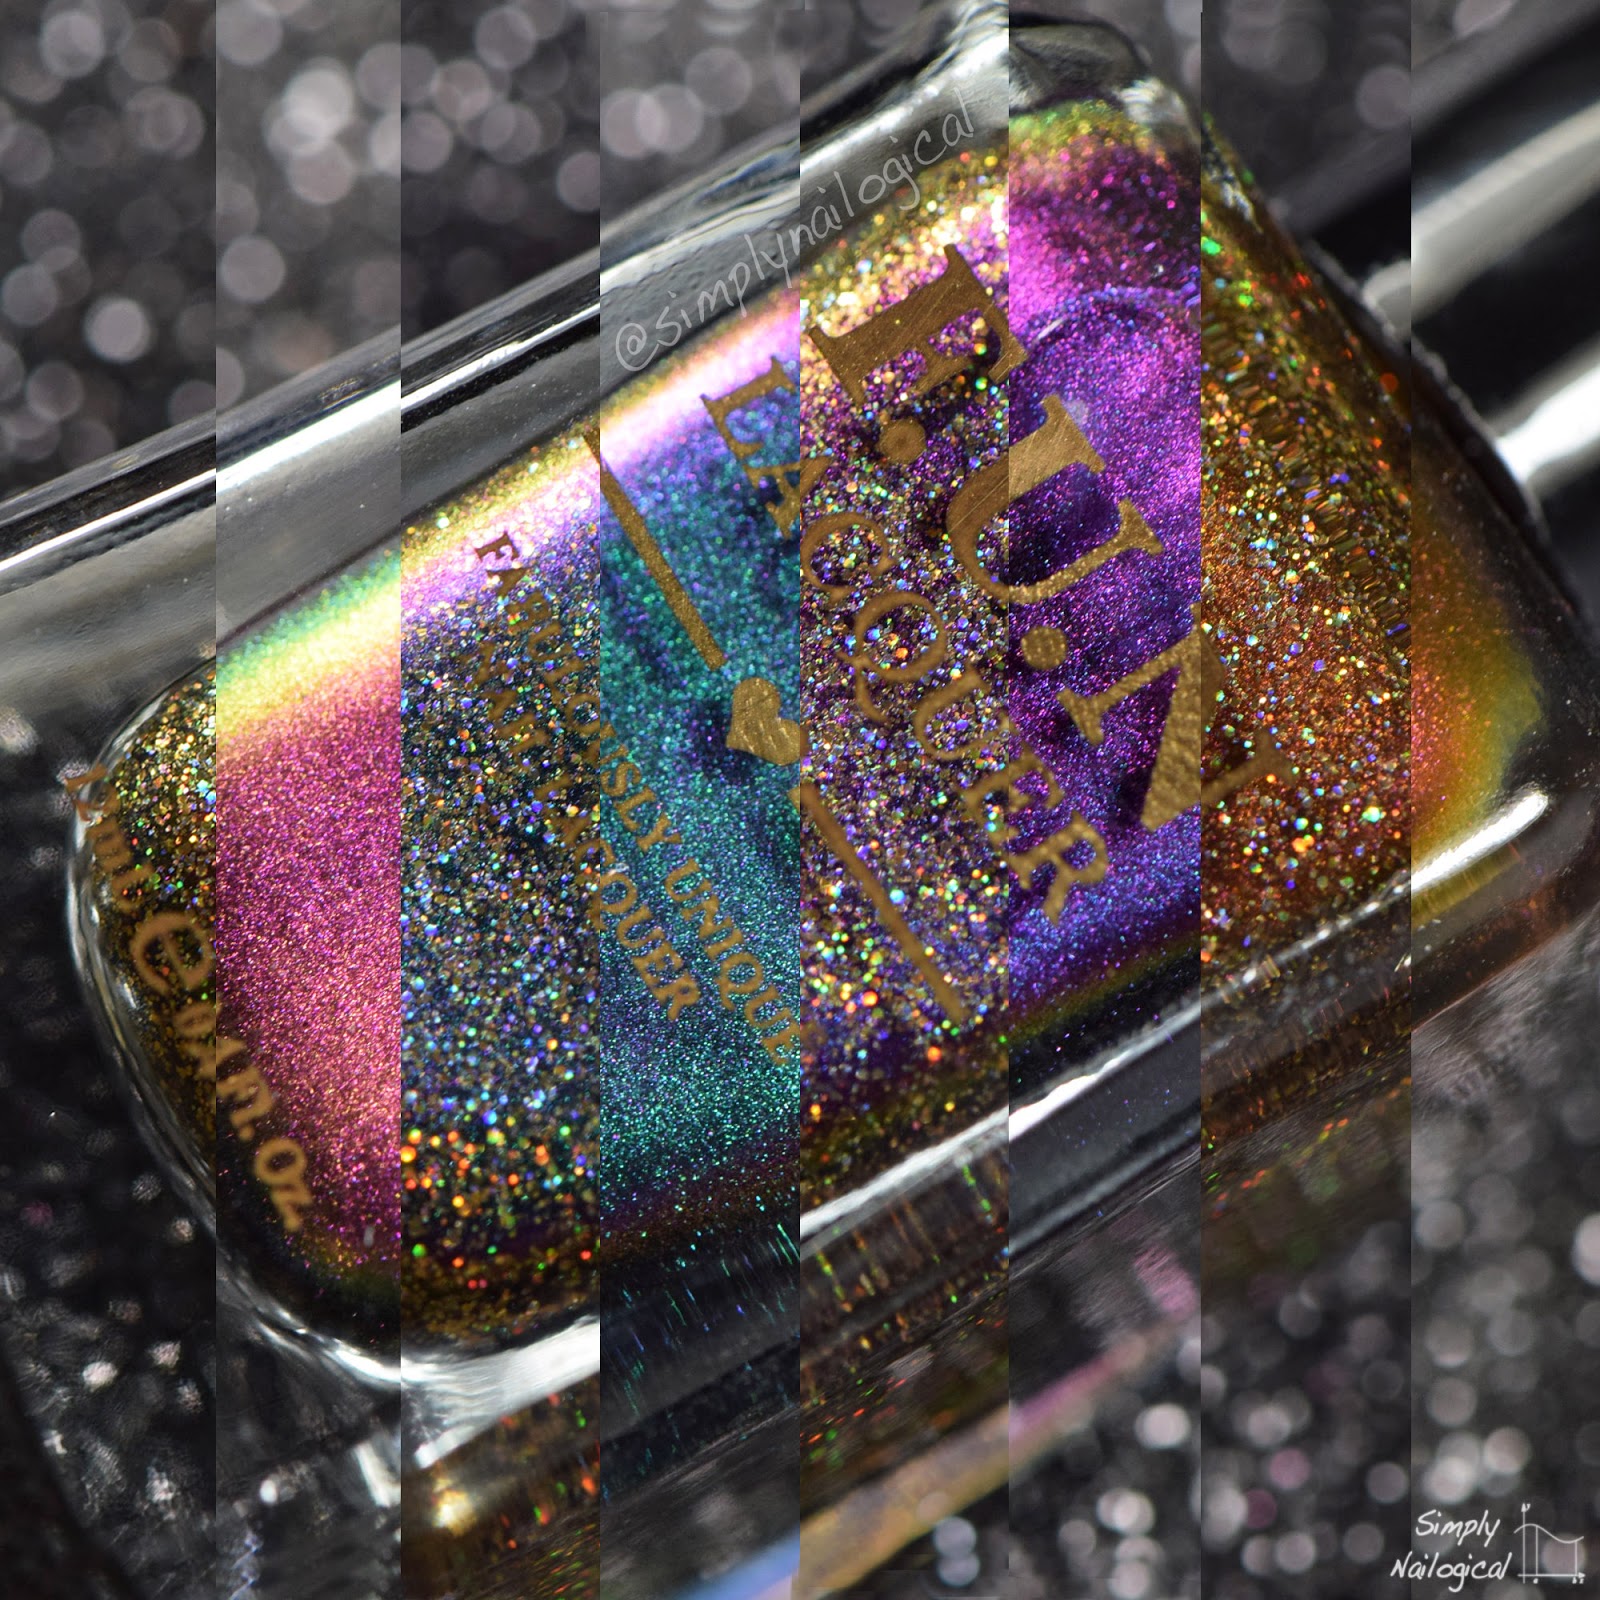 Fun Lacquer 2015 New Years Collection